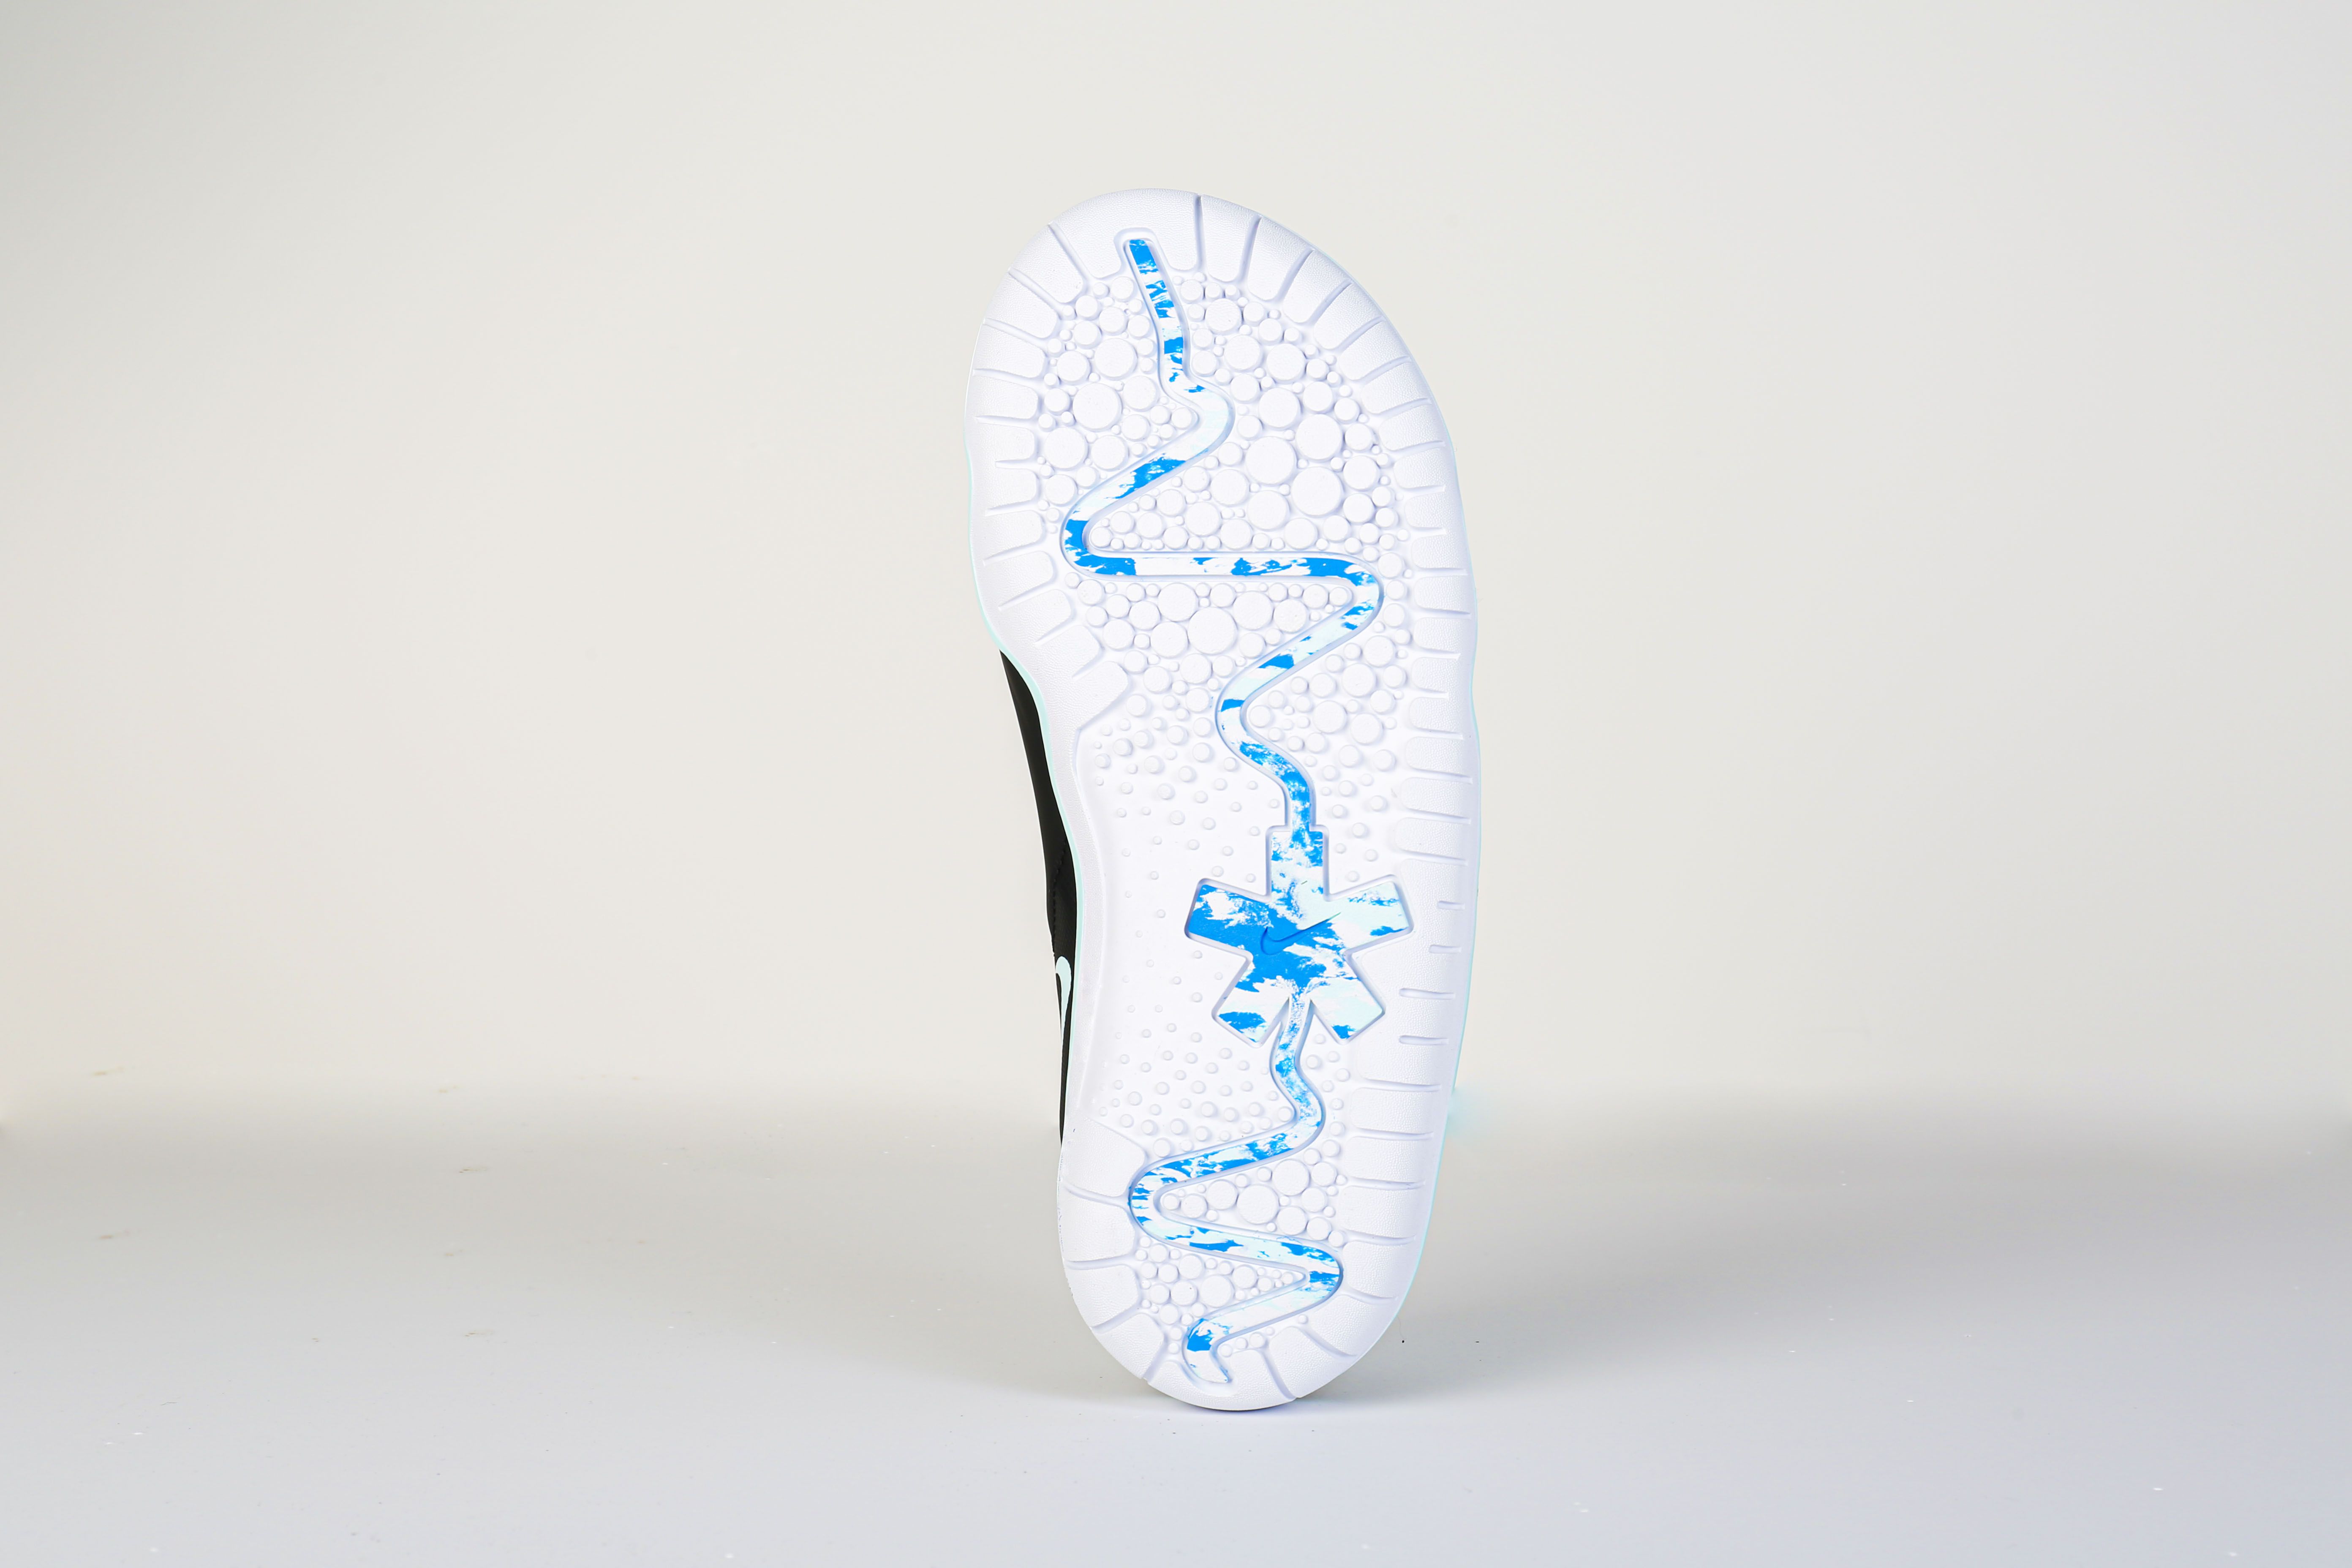 Nursing Nikes: Company shoe for health care workers